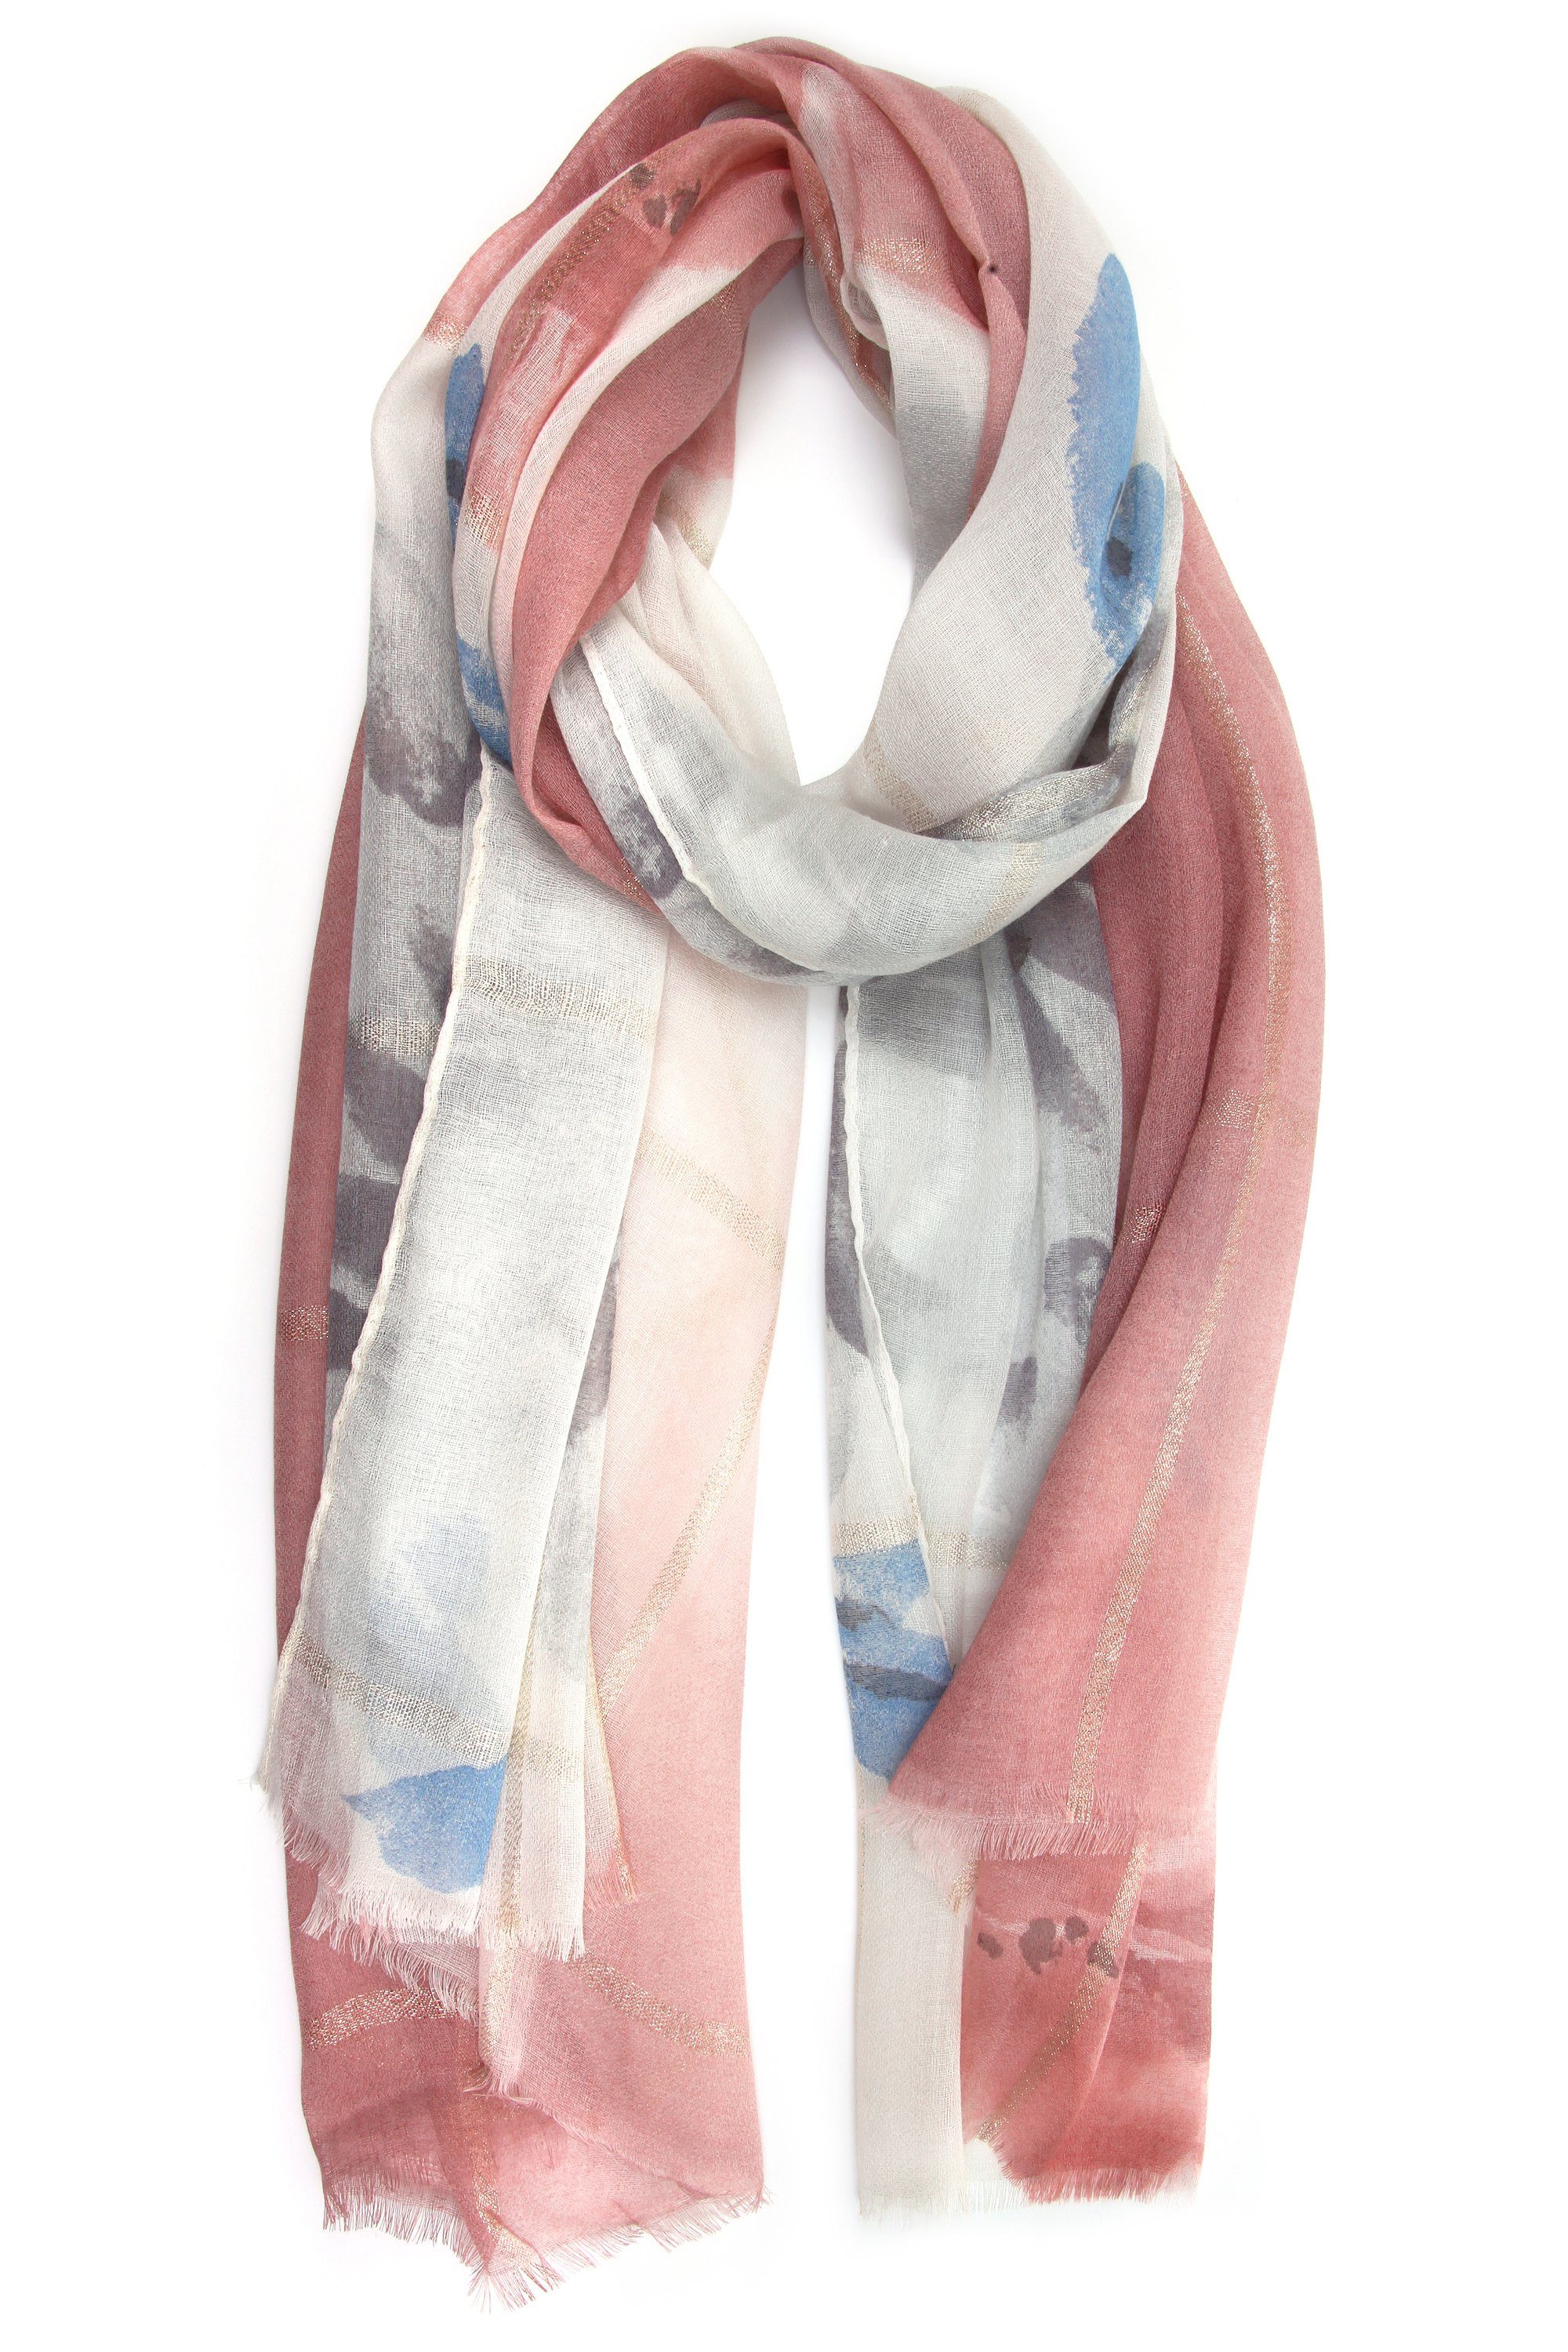 COLLEZIONE ALESSANDRO Modeschal (1-St), Muster Padma, rose mit floralem